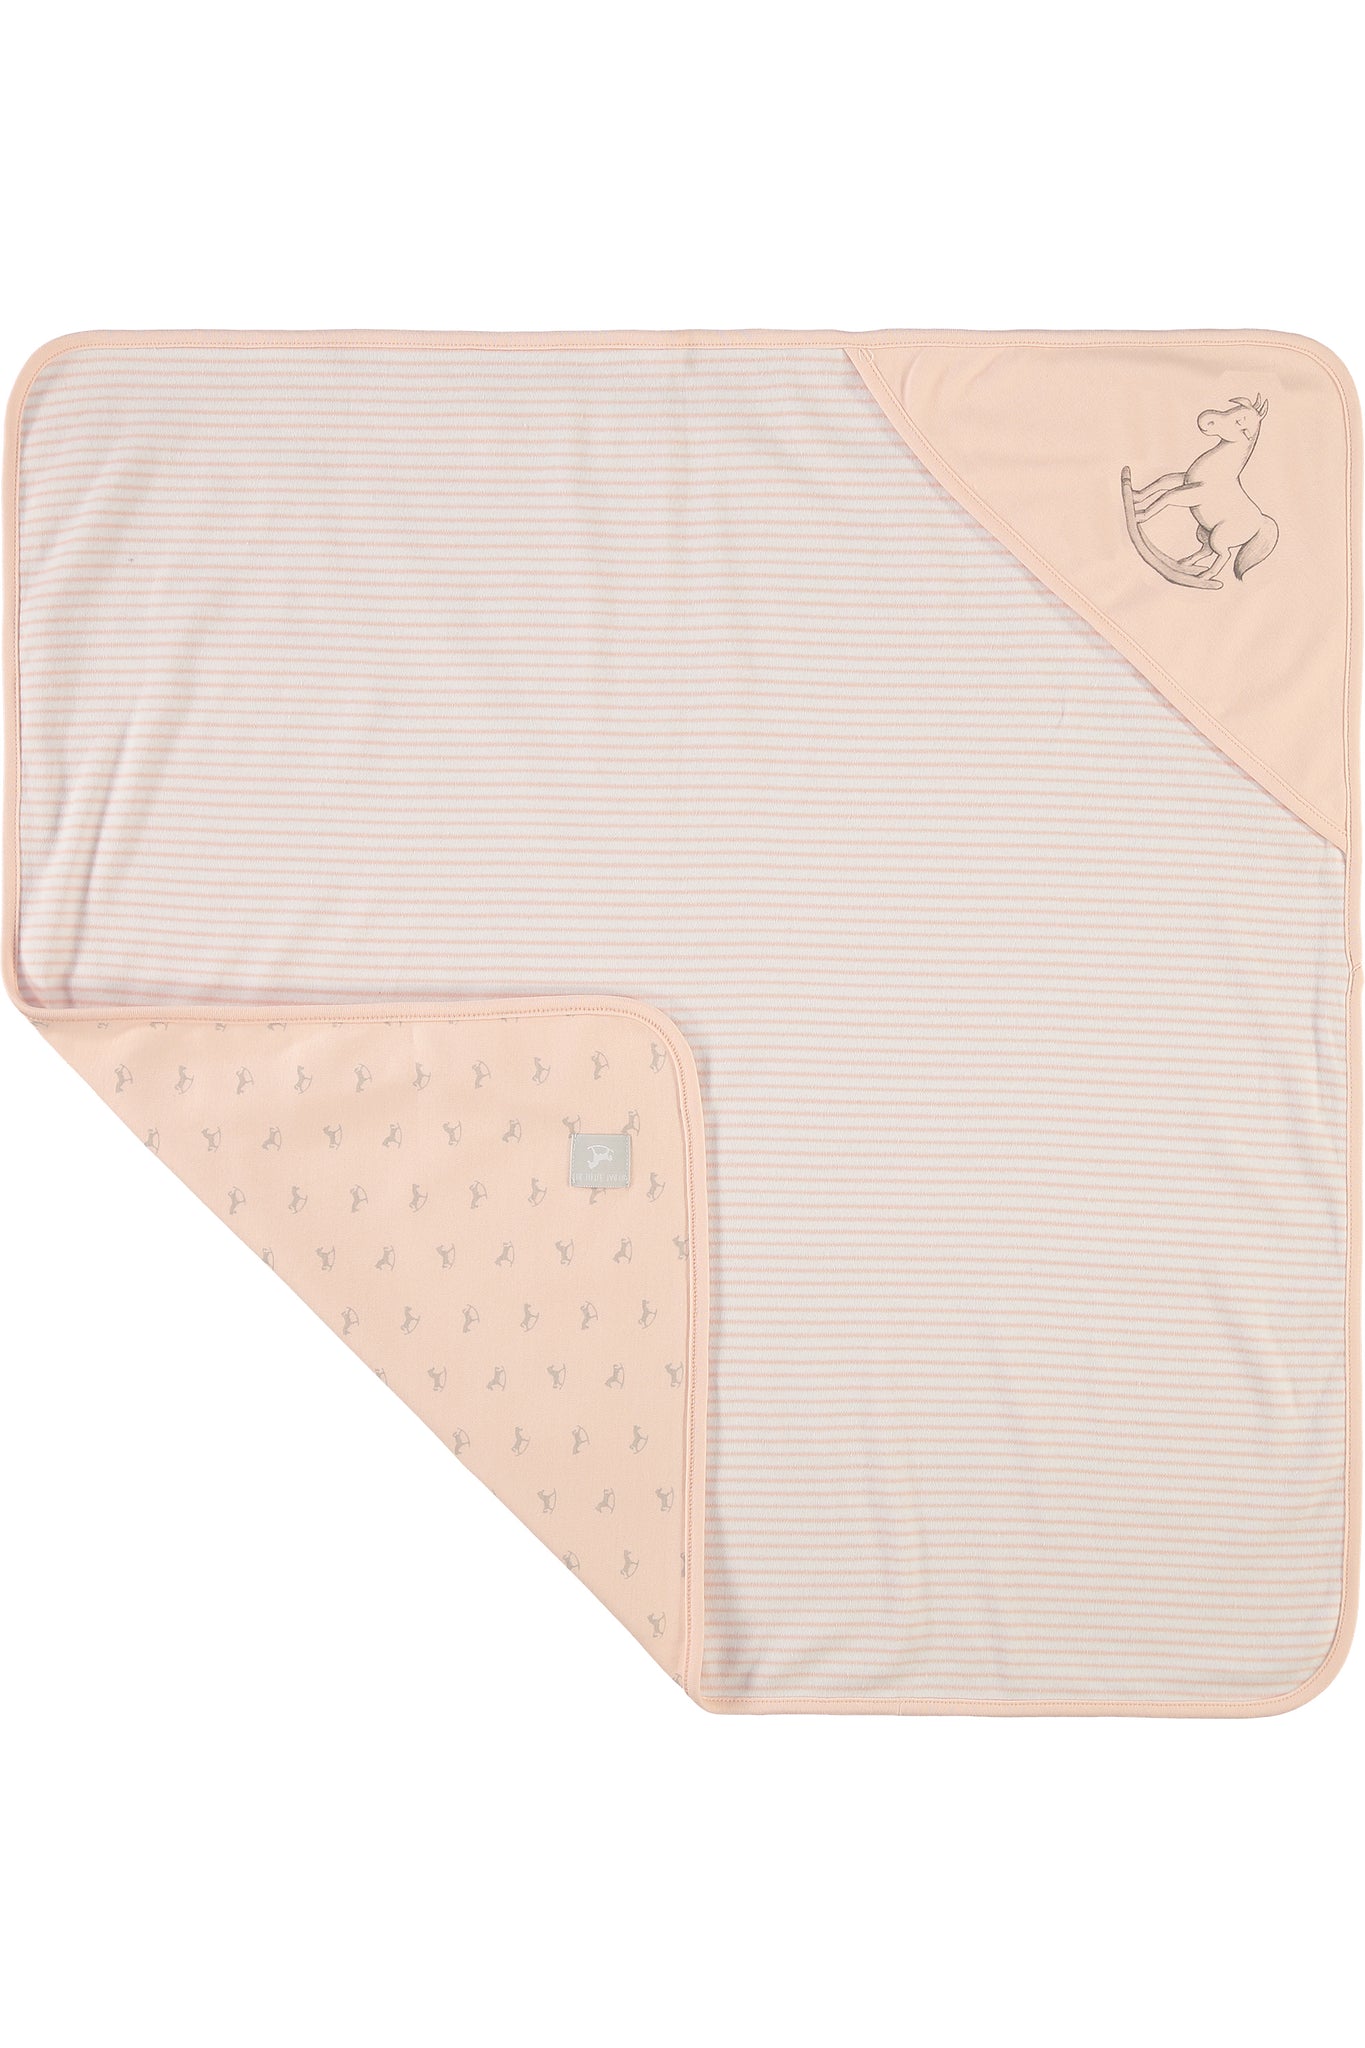 The Little Tailor Reversible Soft Jersey Blanket - Pink